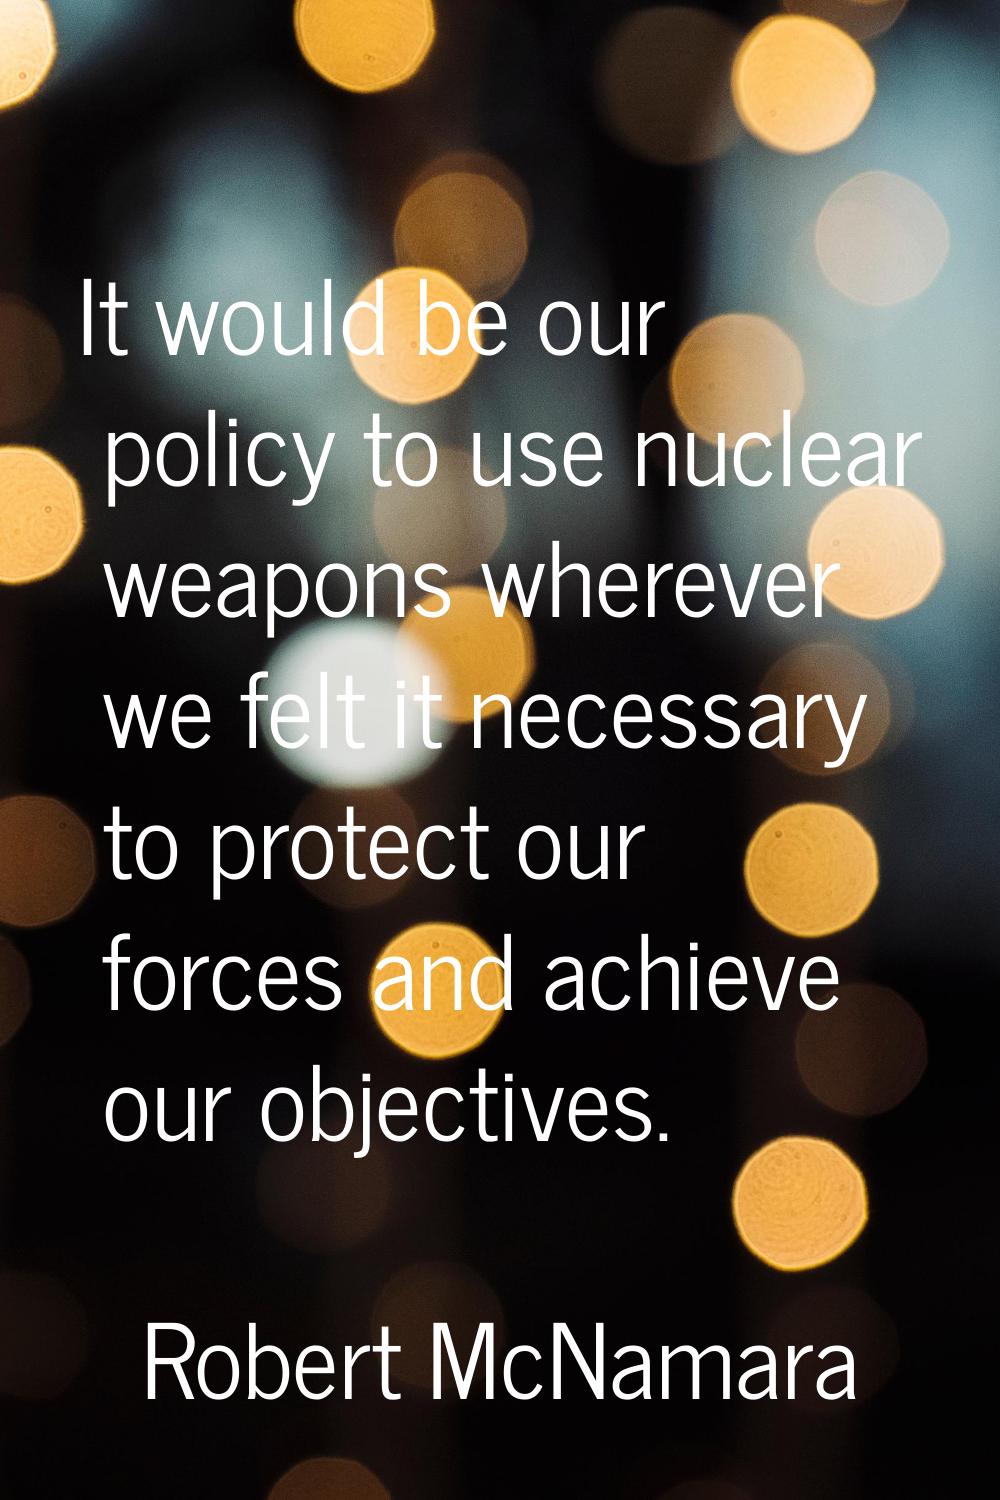 It would be our policy to use nuclear weapons wherever we felt it necessary to protect our forces a